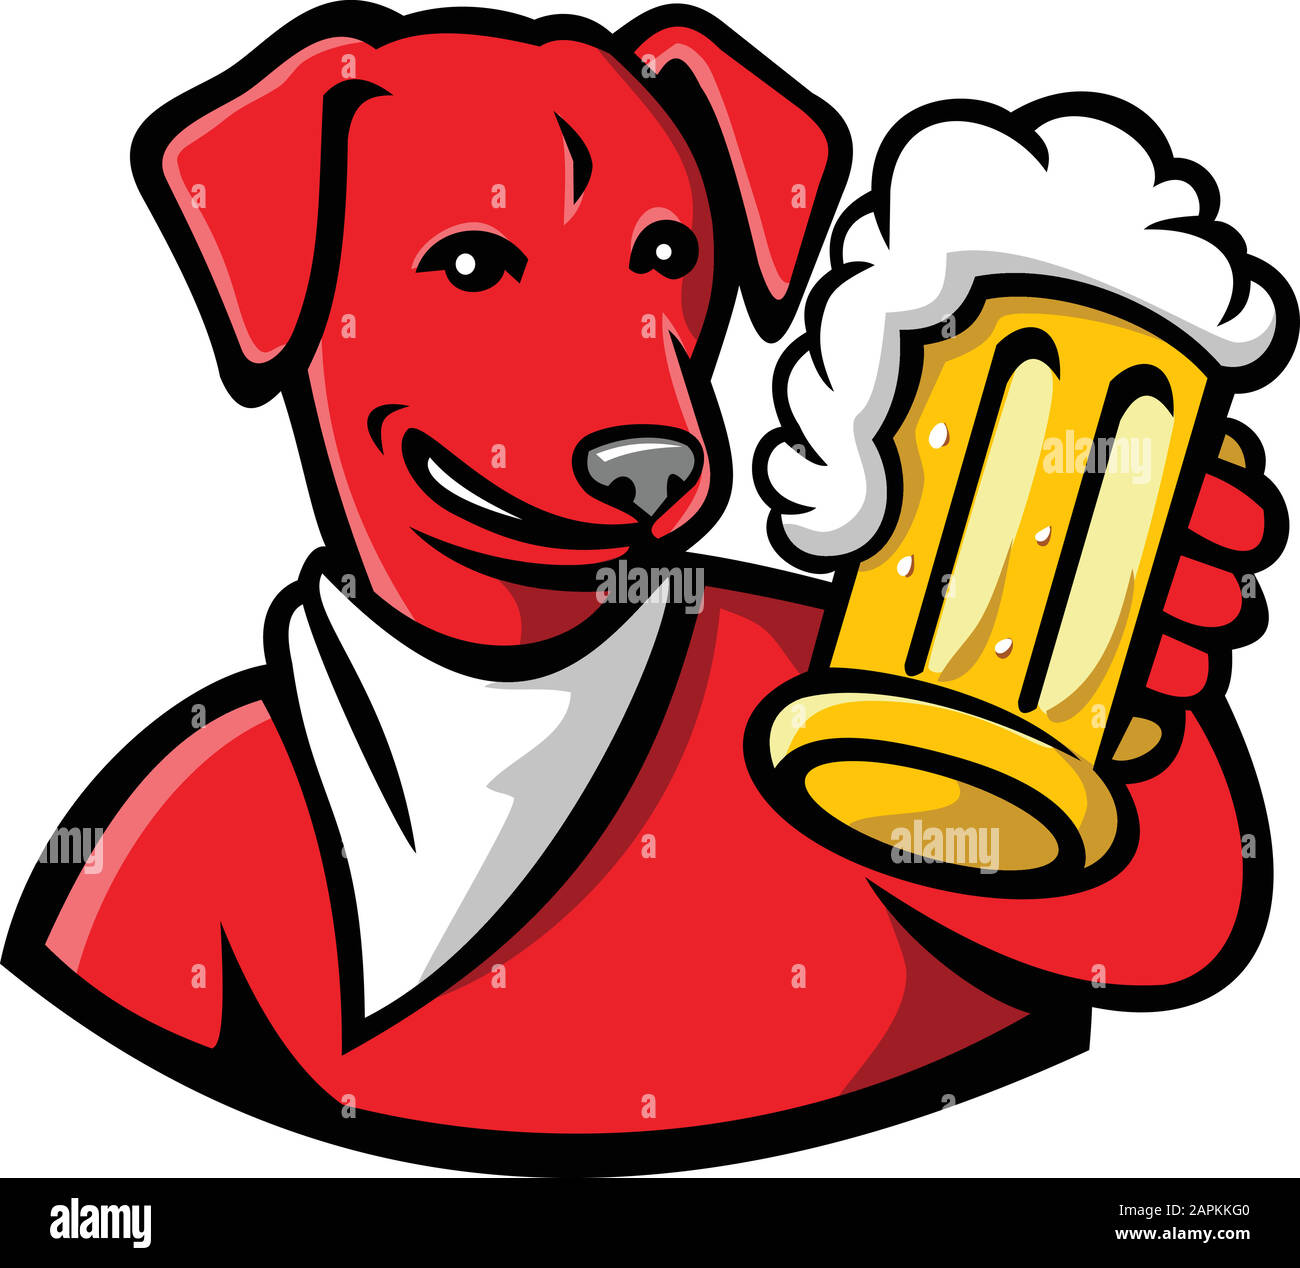 Sports mascot icon illustration of head of a red English Lab or Labrador dog holding a beer mug toasting  viewed from front on isolated background in Stock Vector